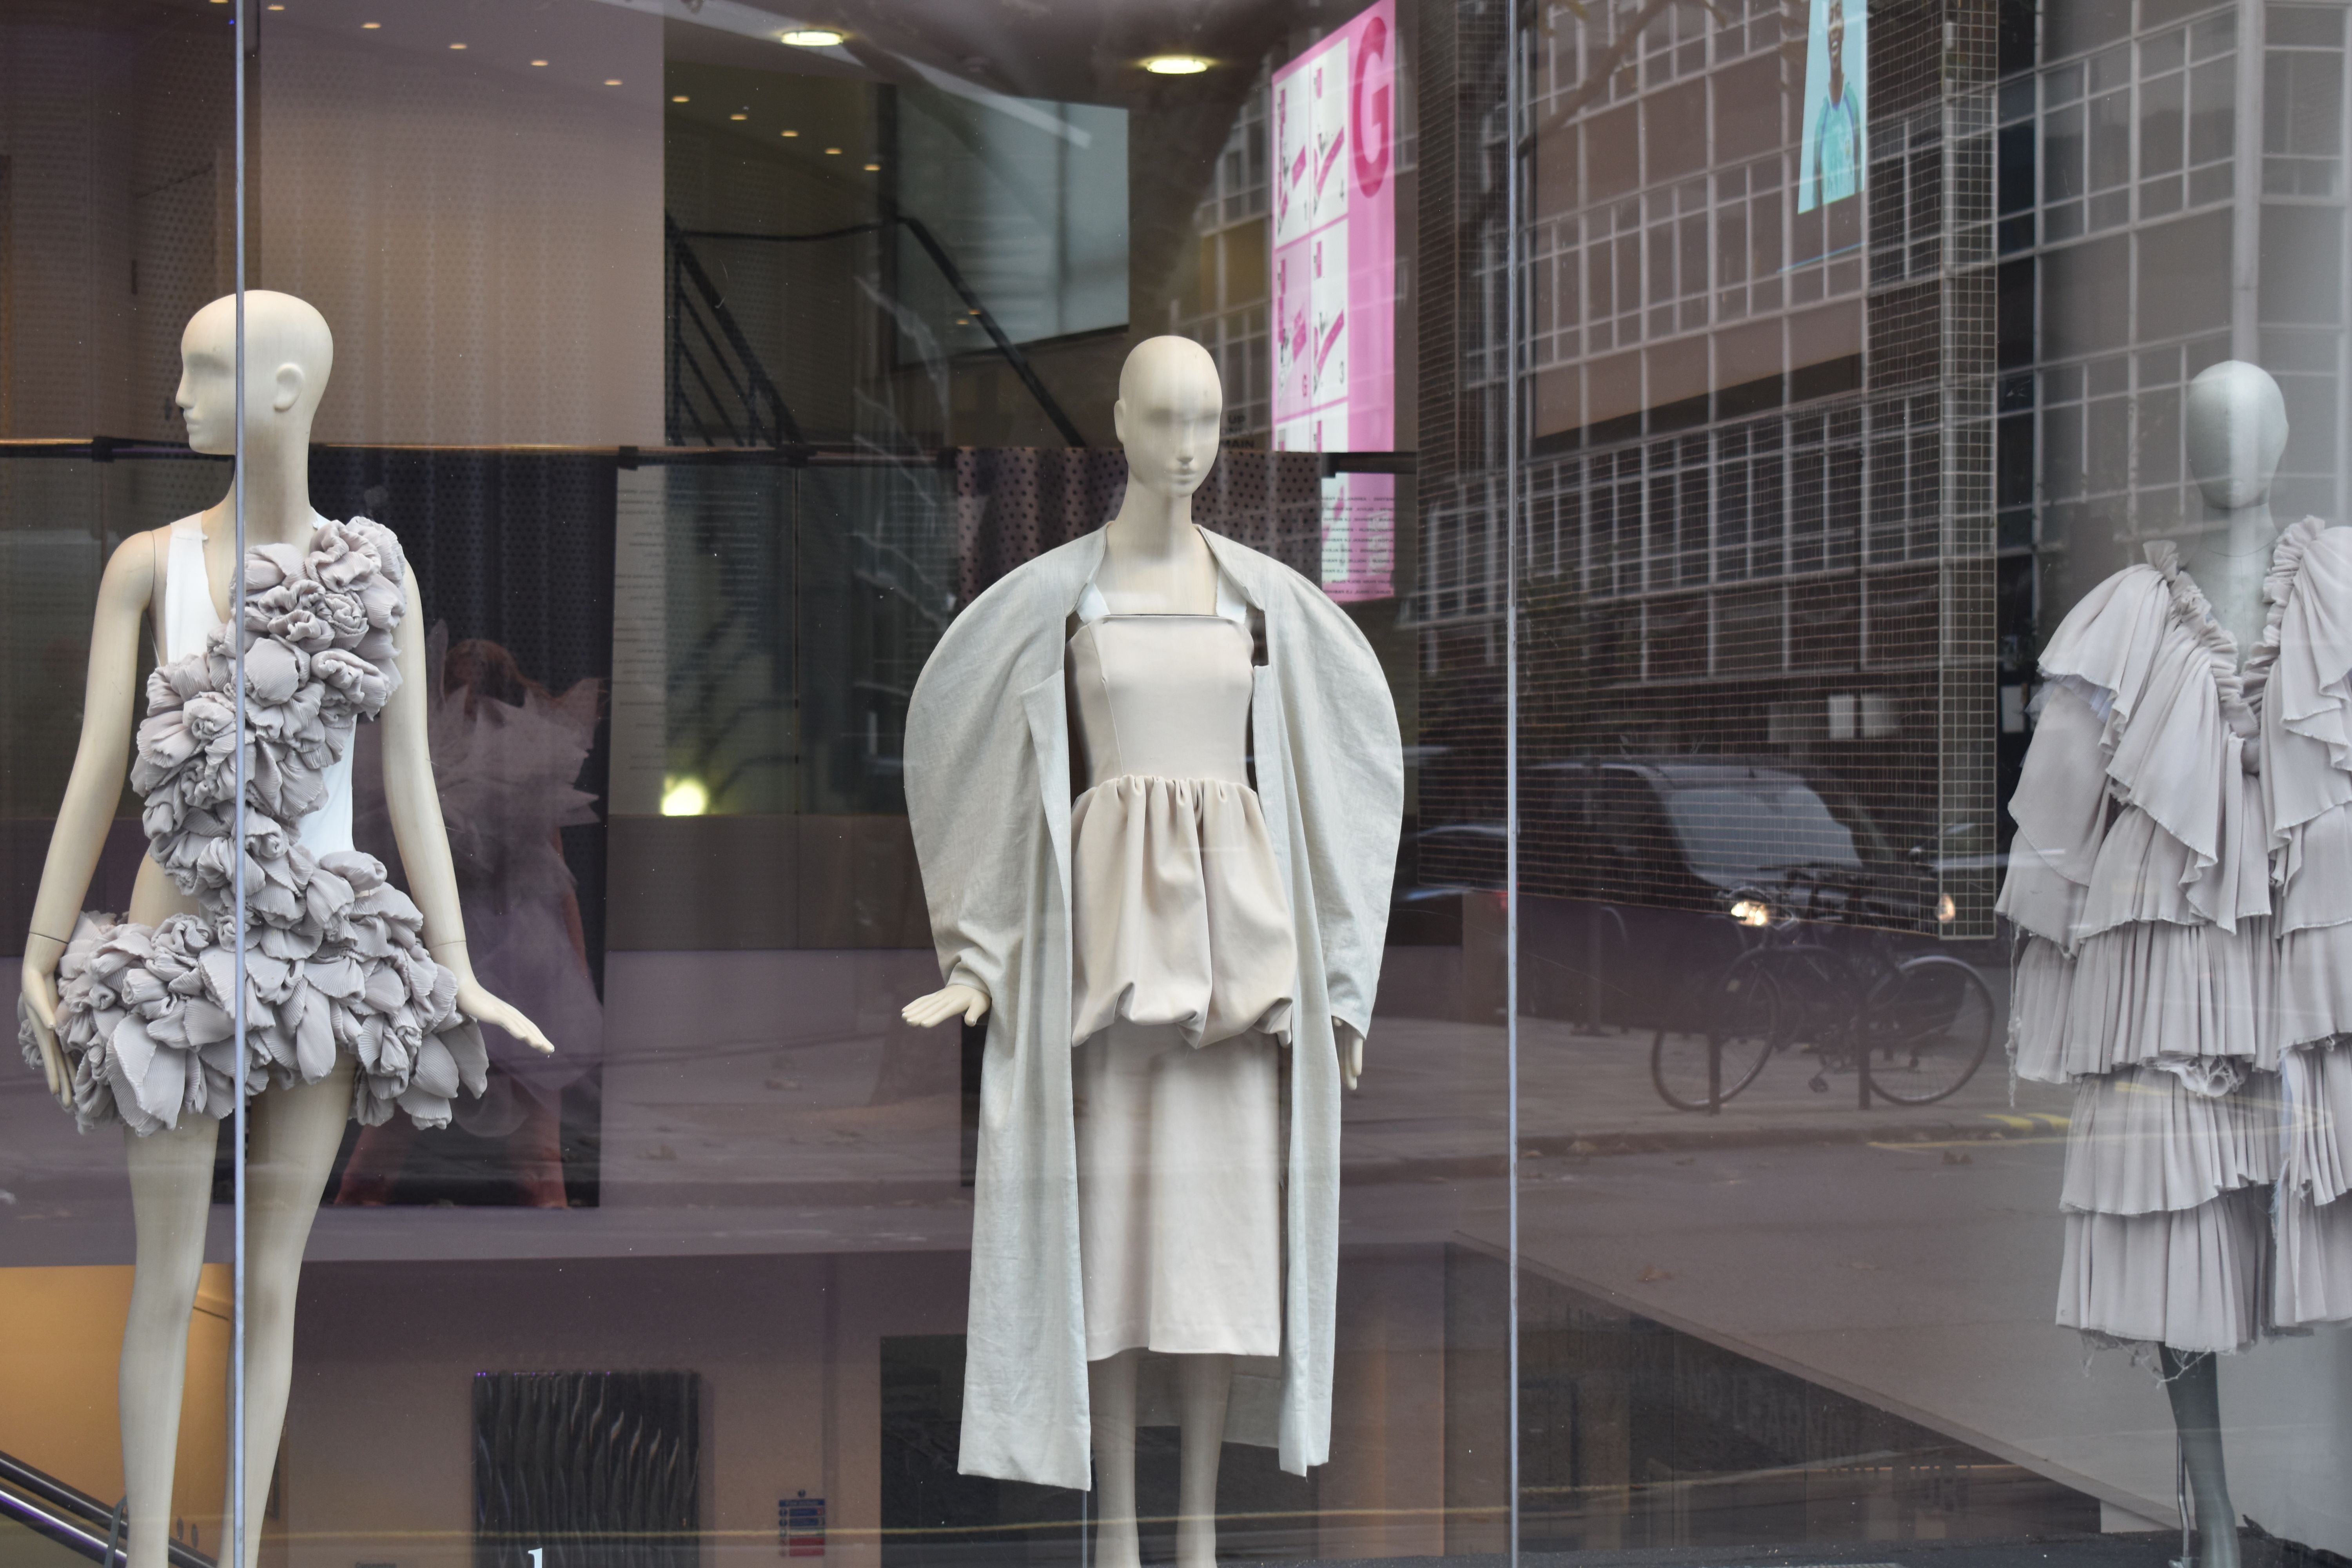 Mannequins in a window